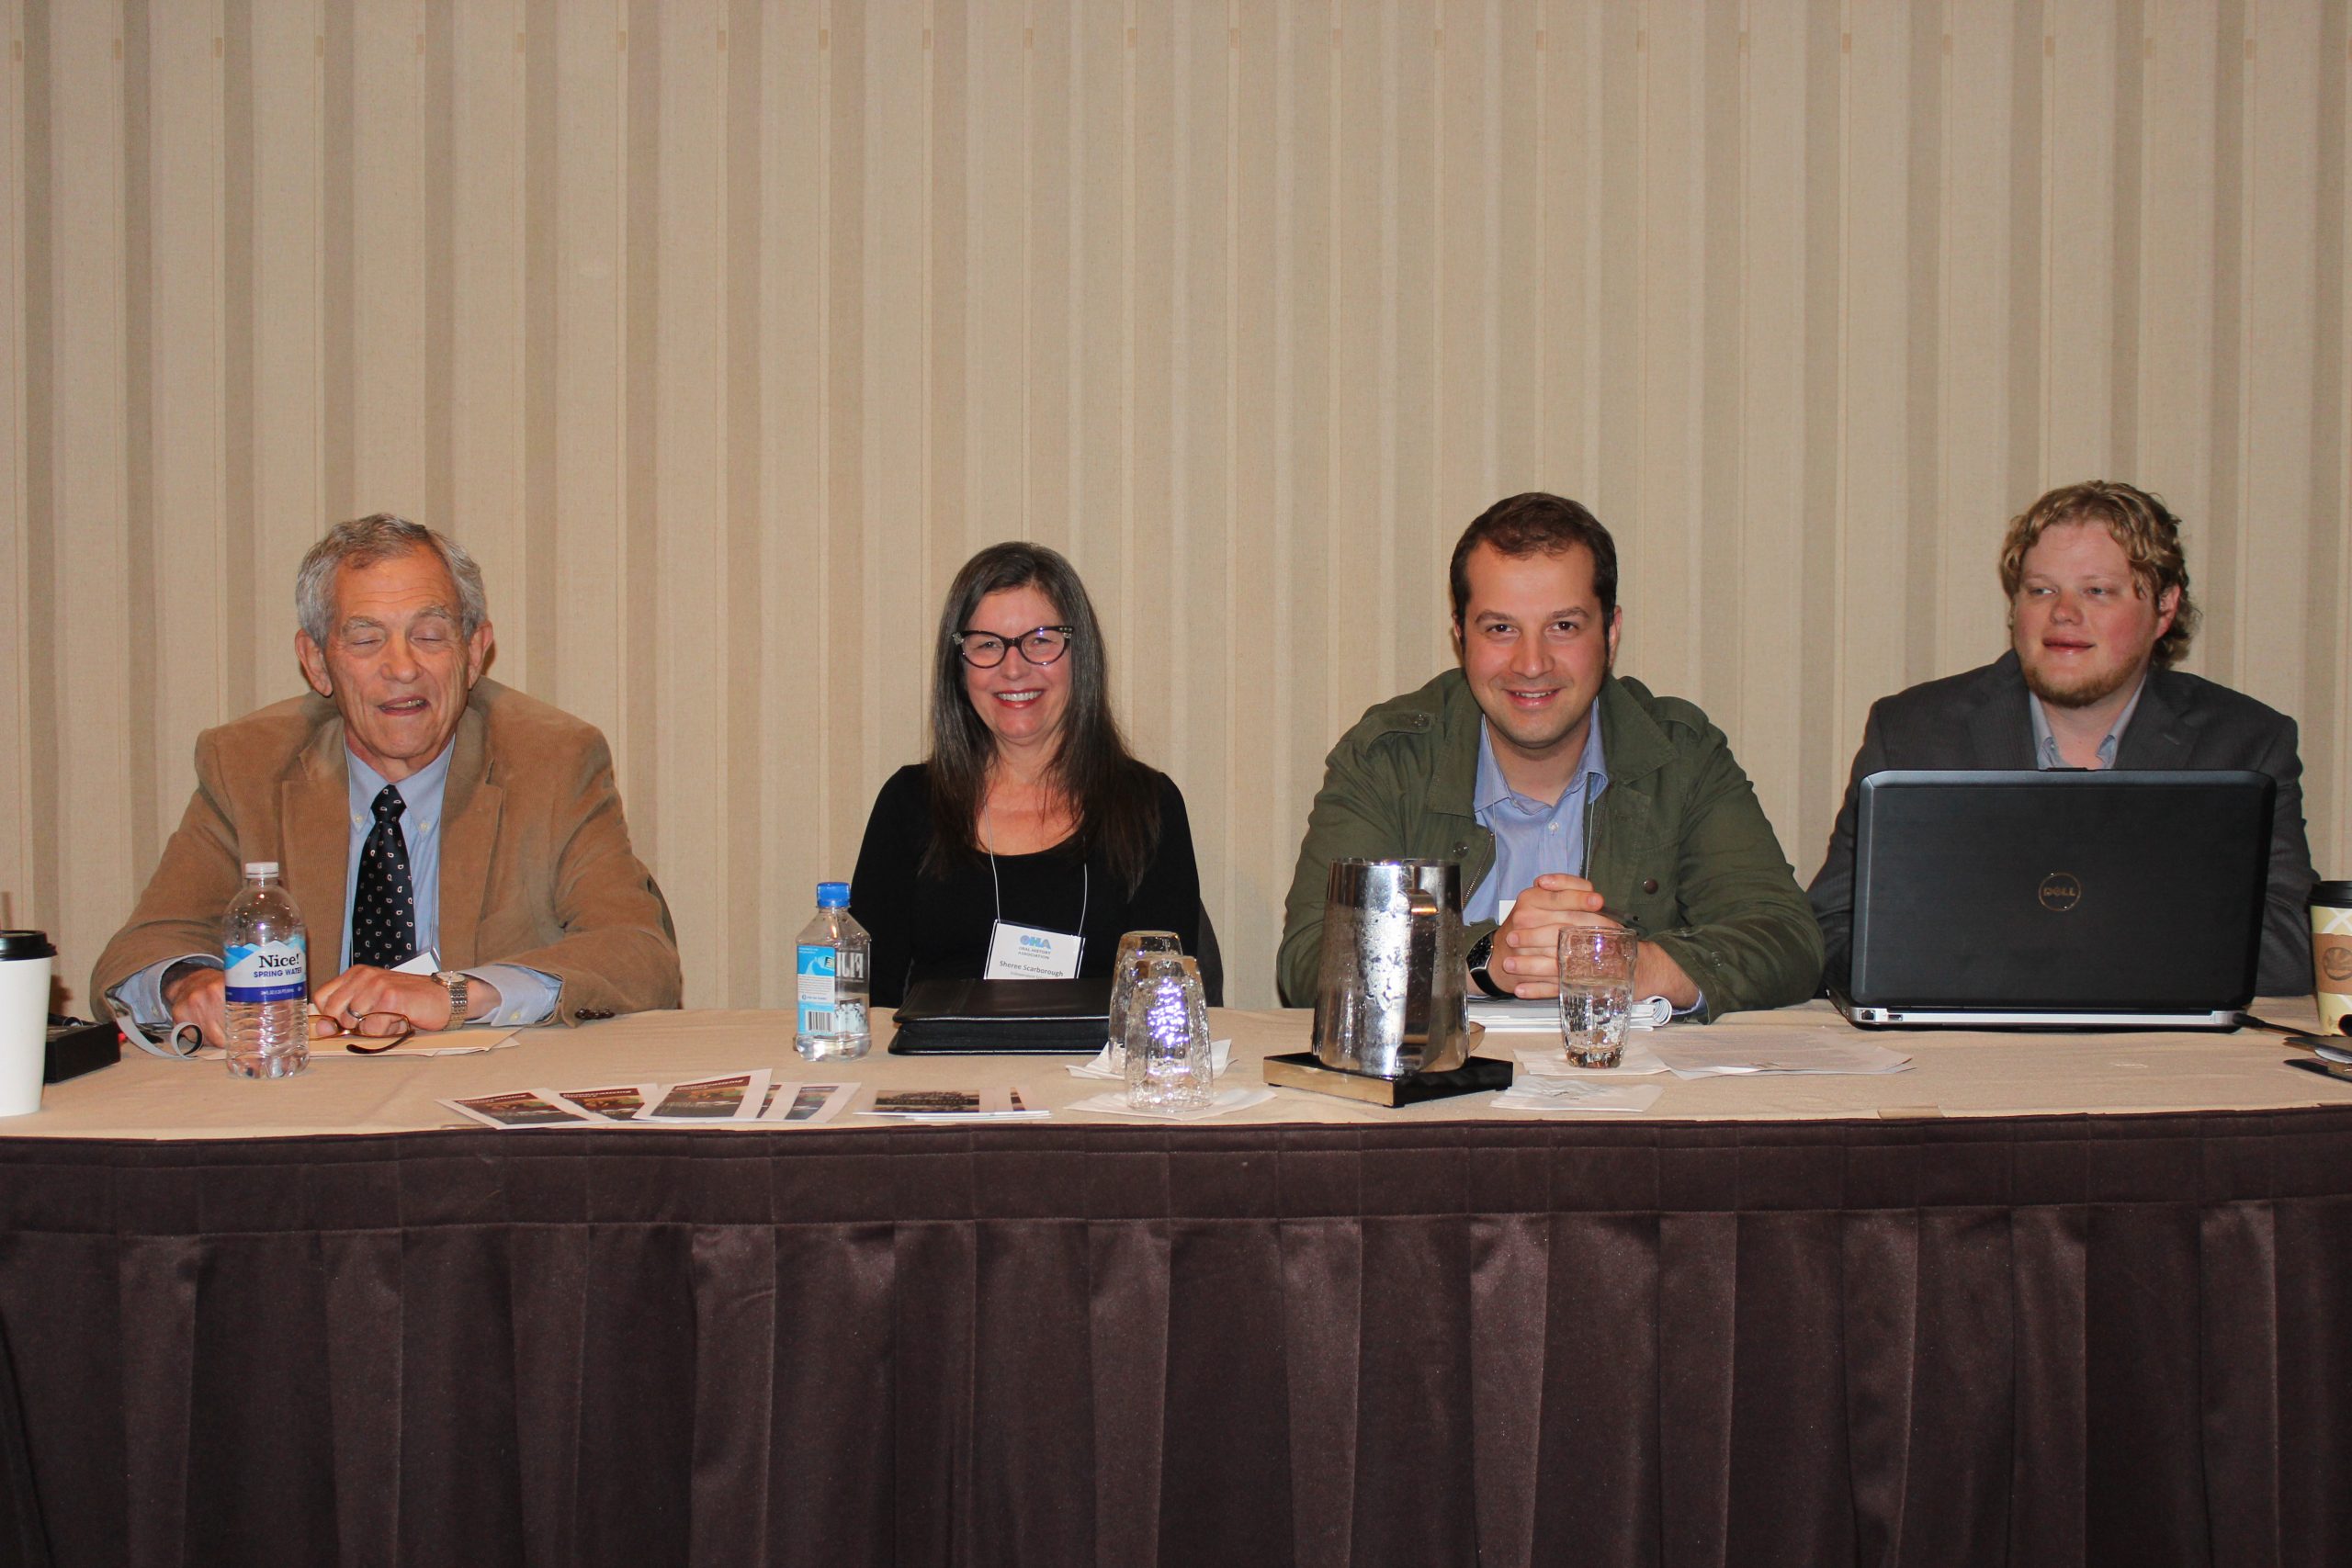 Sitting at a presenters table at the Oral History Association Annual Meeting, 2014: Prof. Michael Gordon (University of Wisconsin-Milwaukee, Emeritus), Sheree Scarborough (Oral Historian), Scott Price (OHC Researcher), Kent Davies (OHC Technician).